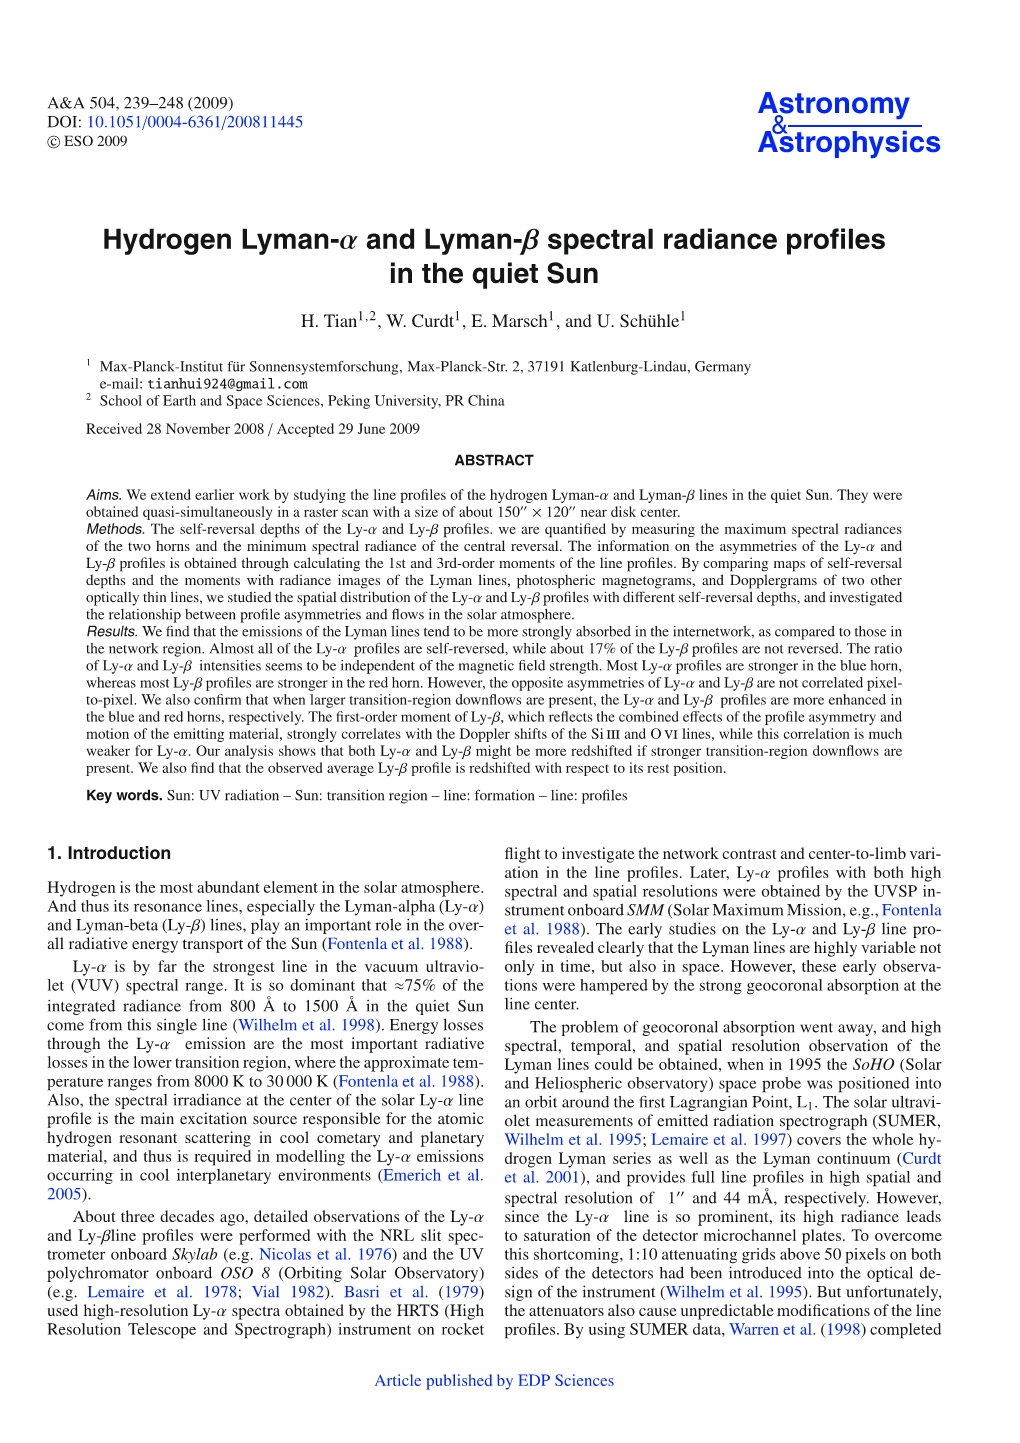 Hydrogen Lyman-Α and Lyman-Β Spectral Radiance Profiles in The